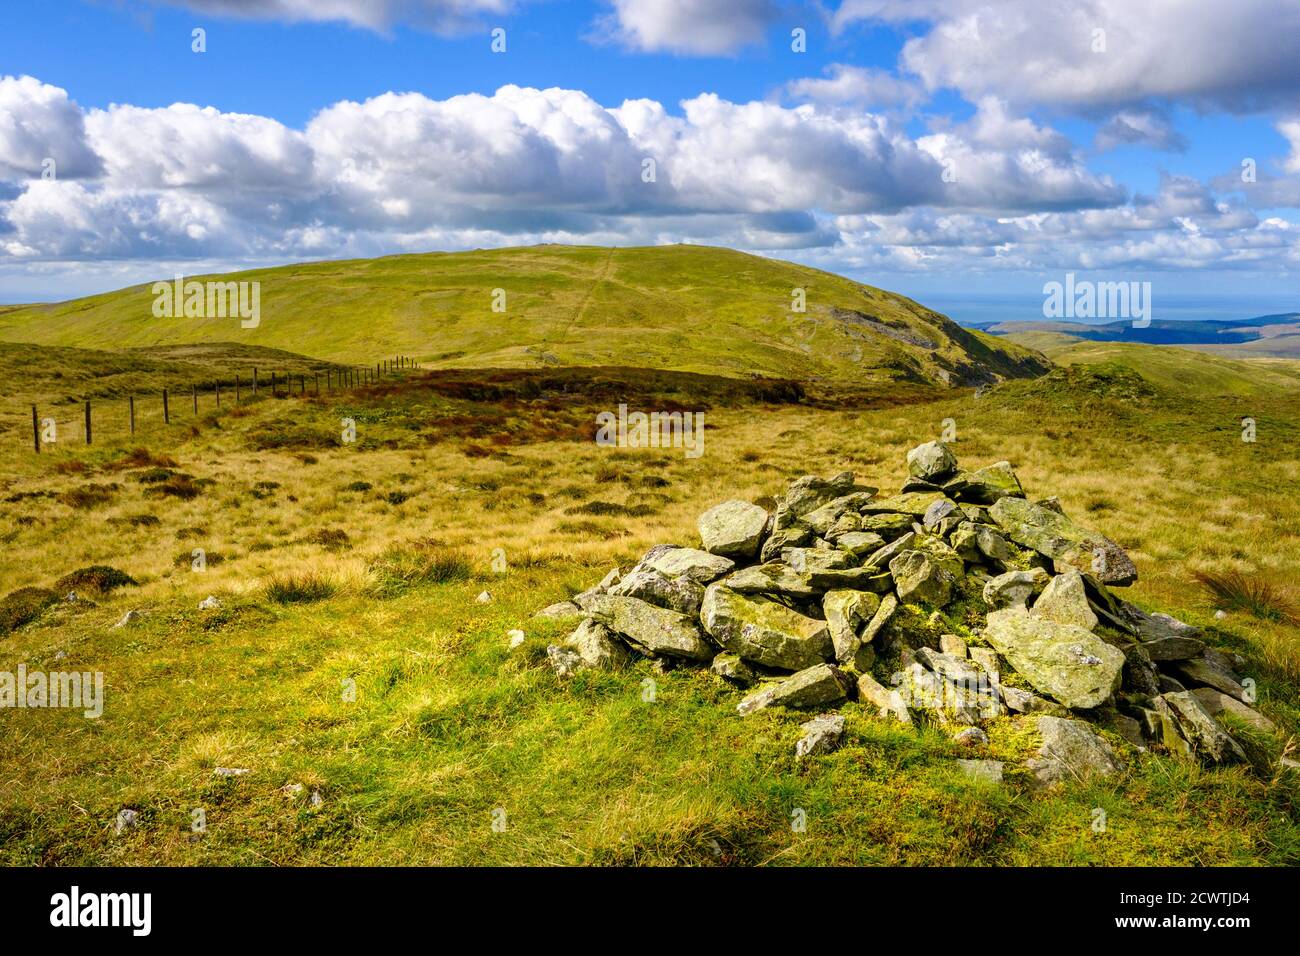 Cairn on the walk up Plynlimon, the highest hill in the Cambrian Mountains, Mid Wales Stock Photo